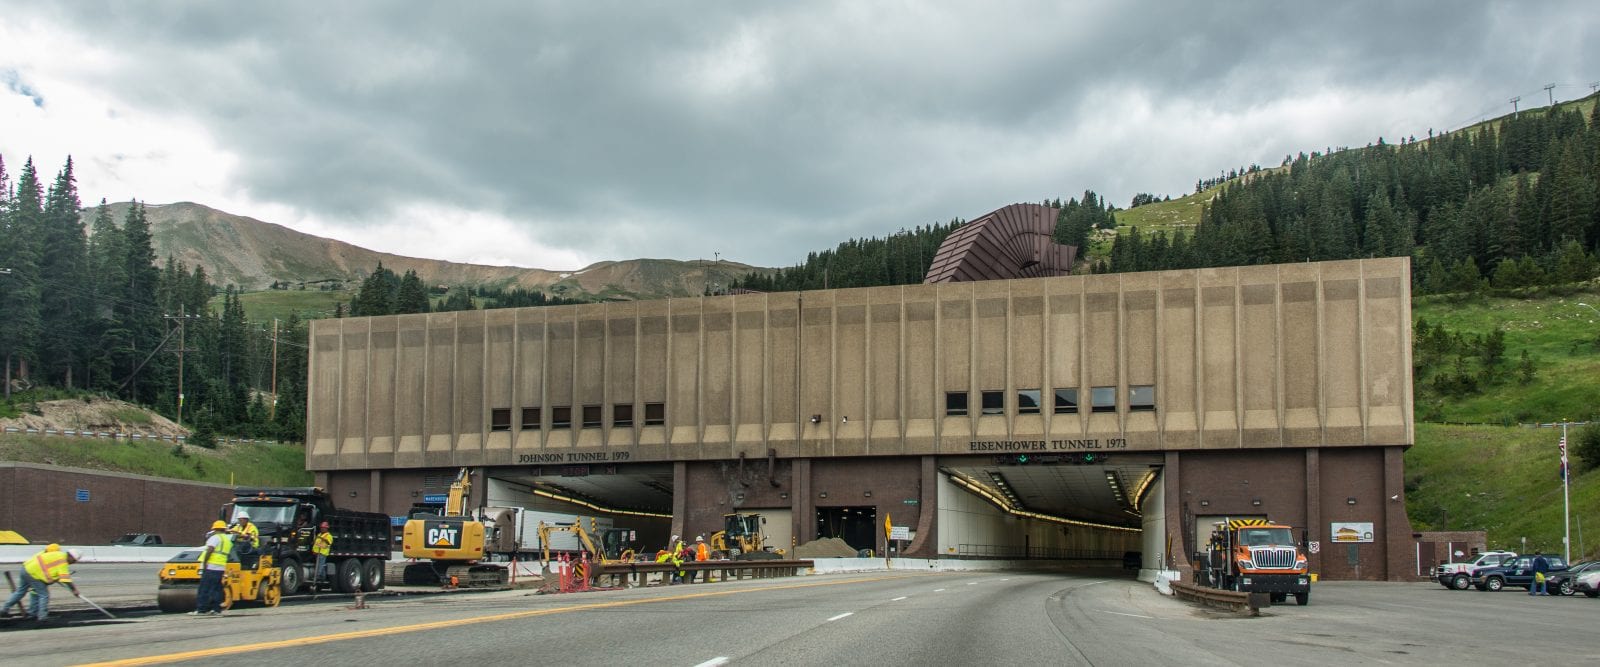 The Dwight Eisenhower Memorial Tunnel, CO